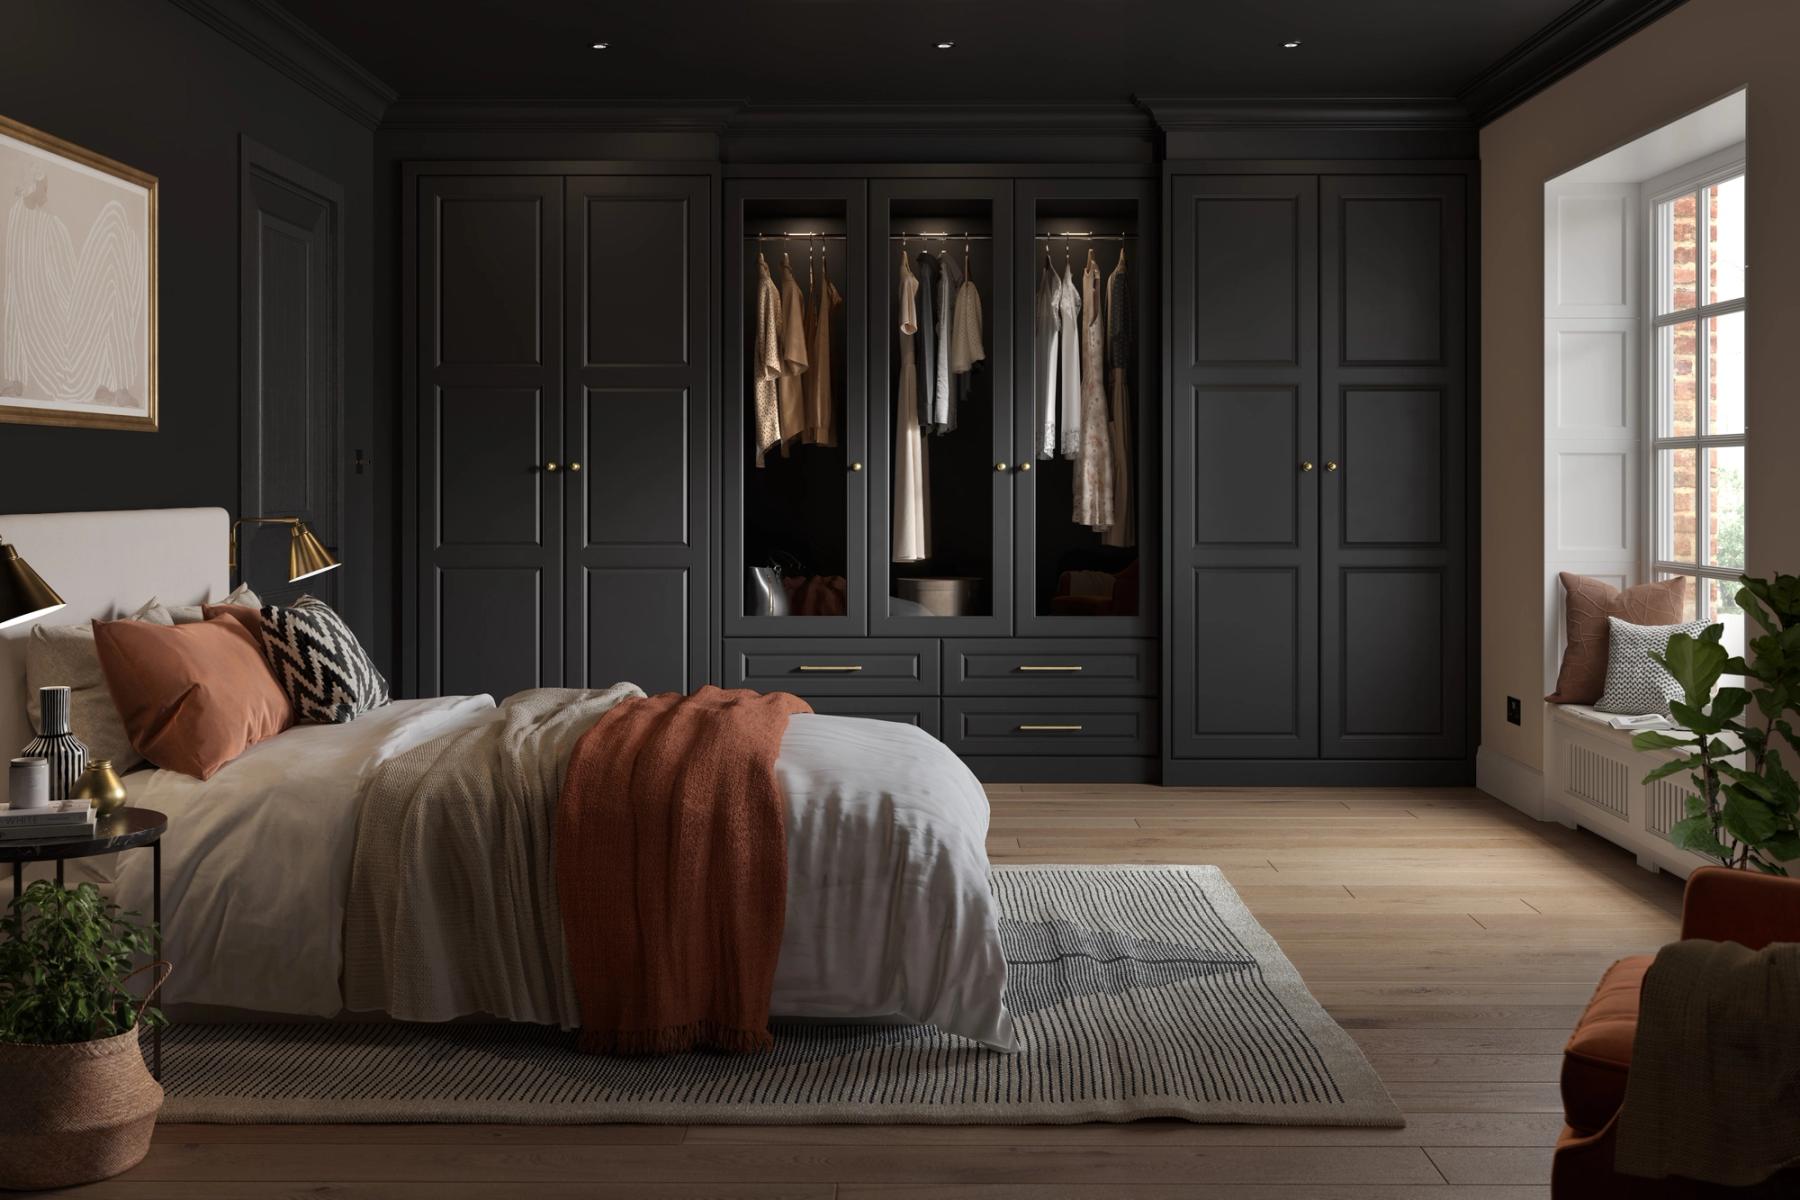 Dark cosy bedroom with black walls, ceiling and wardrobes. CGI image designed and rendered by Pikcells